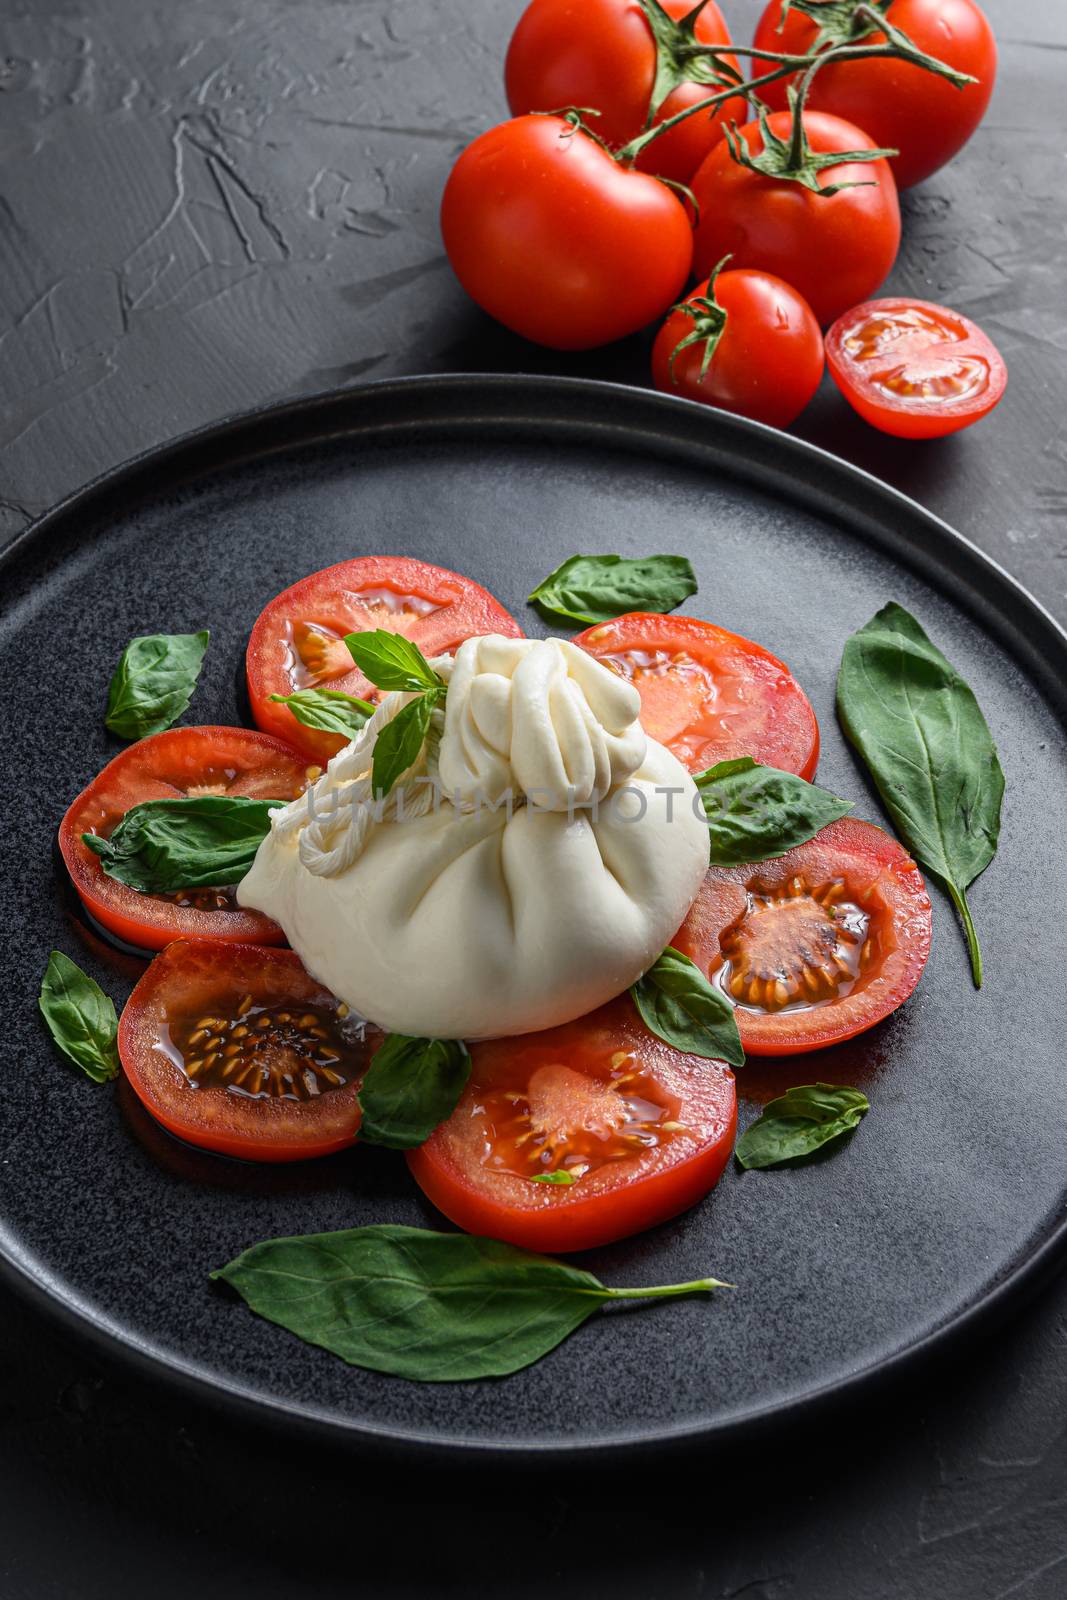 Burrata, Italian fresh cheese made from cream and milk of buffalo or cow. on black plate over black stone surface top view close up.